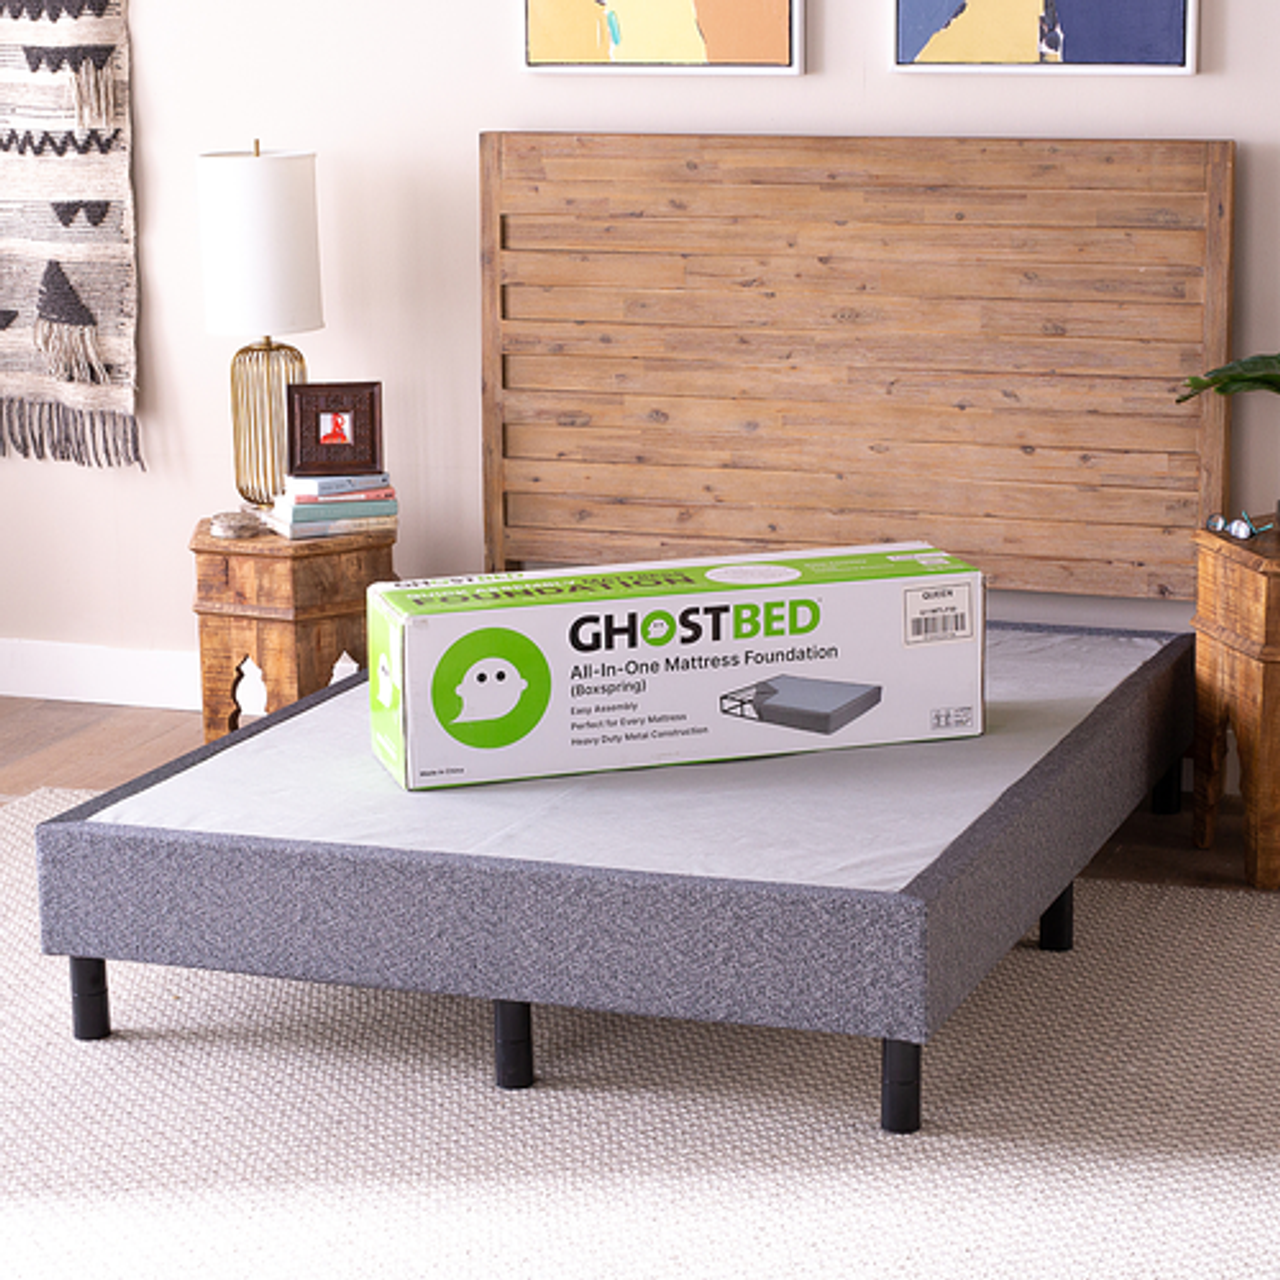 Ghostbed - All-in-One Box Spring & Foundation - Full